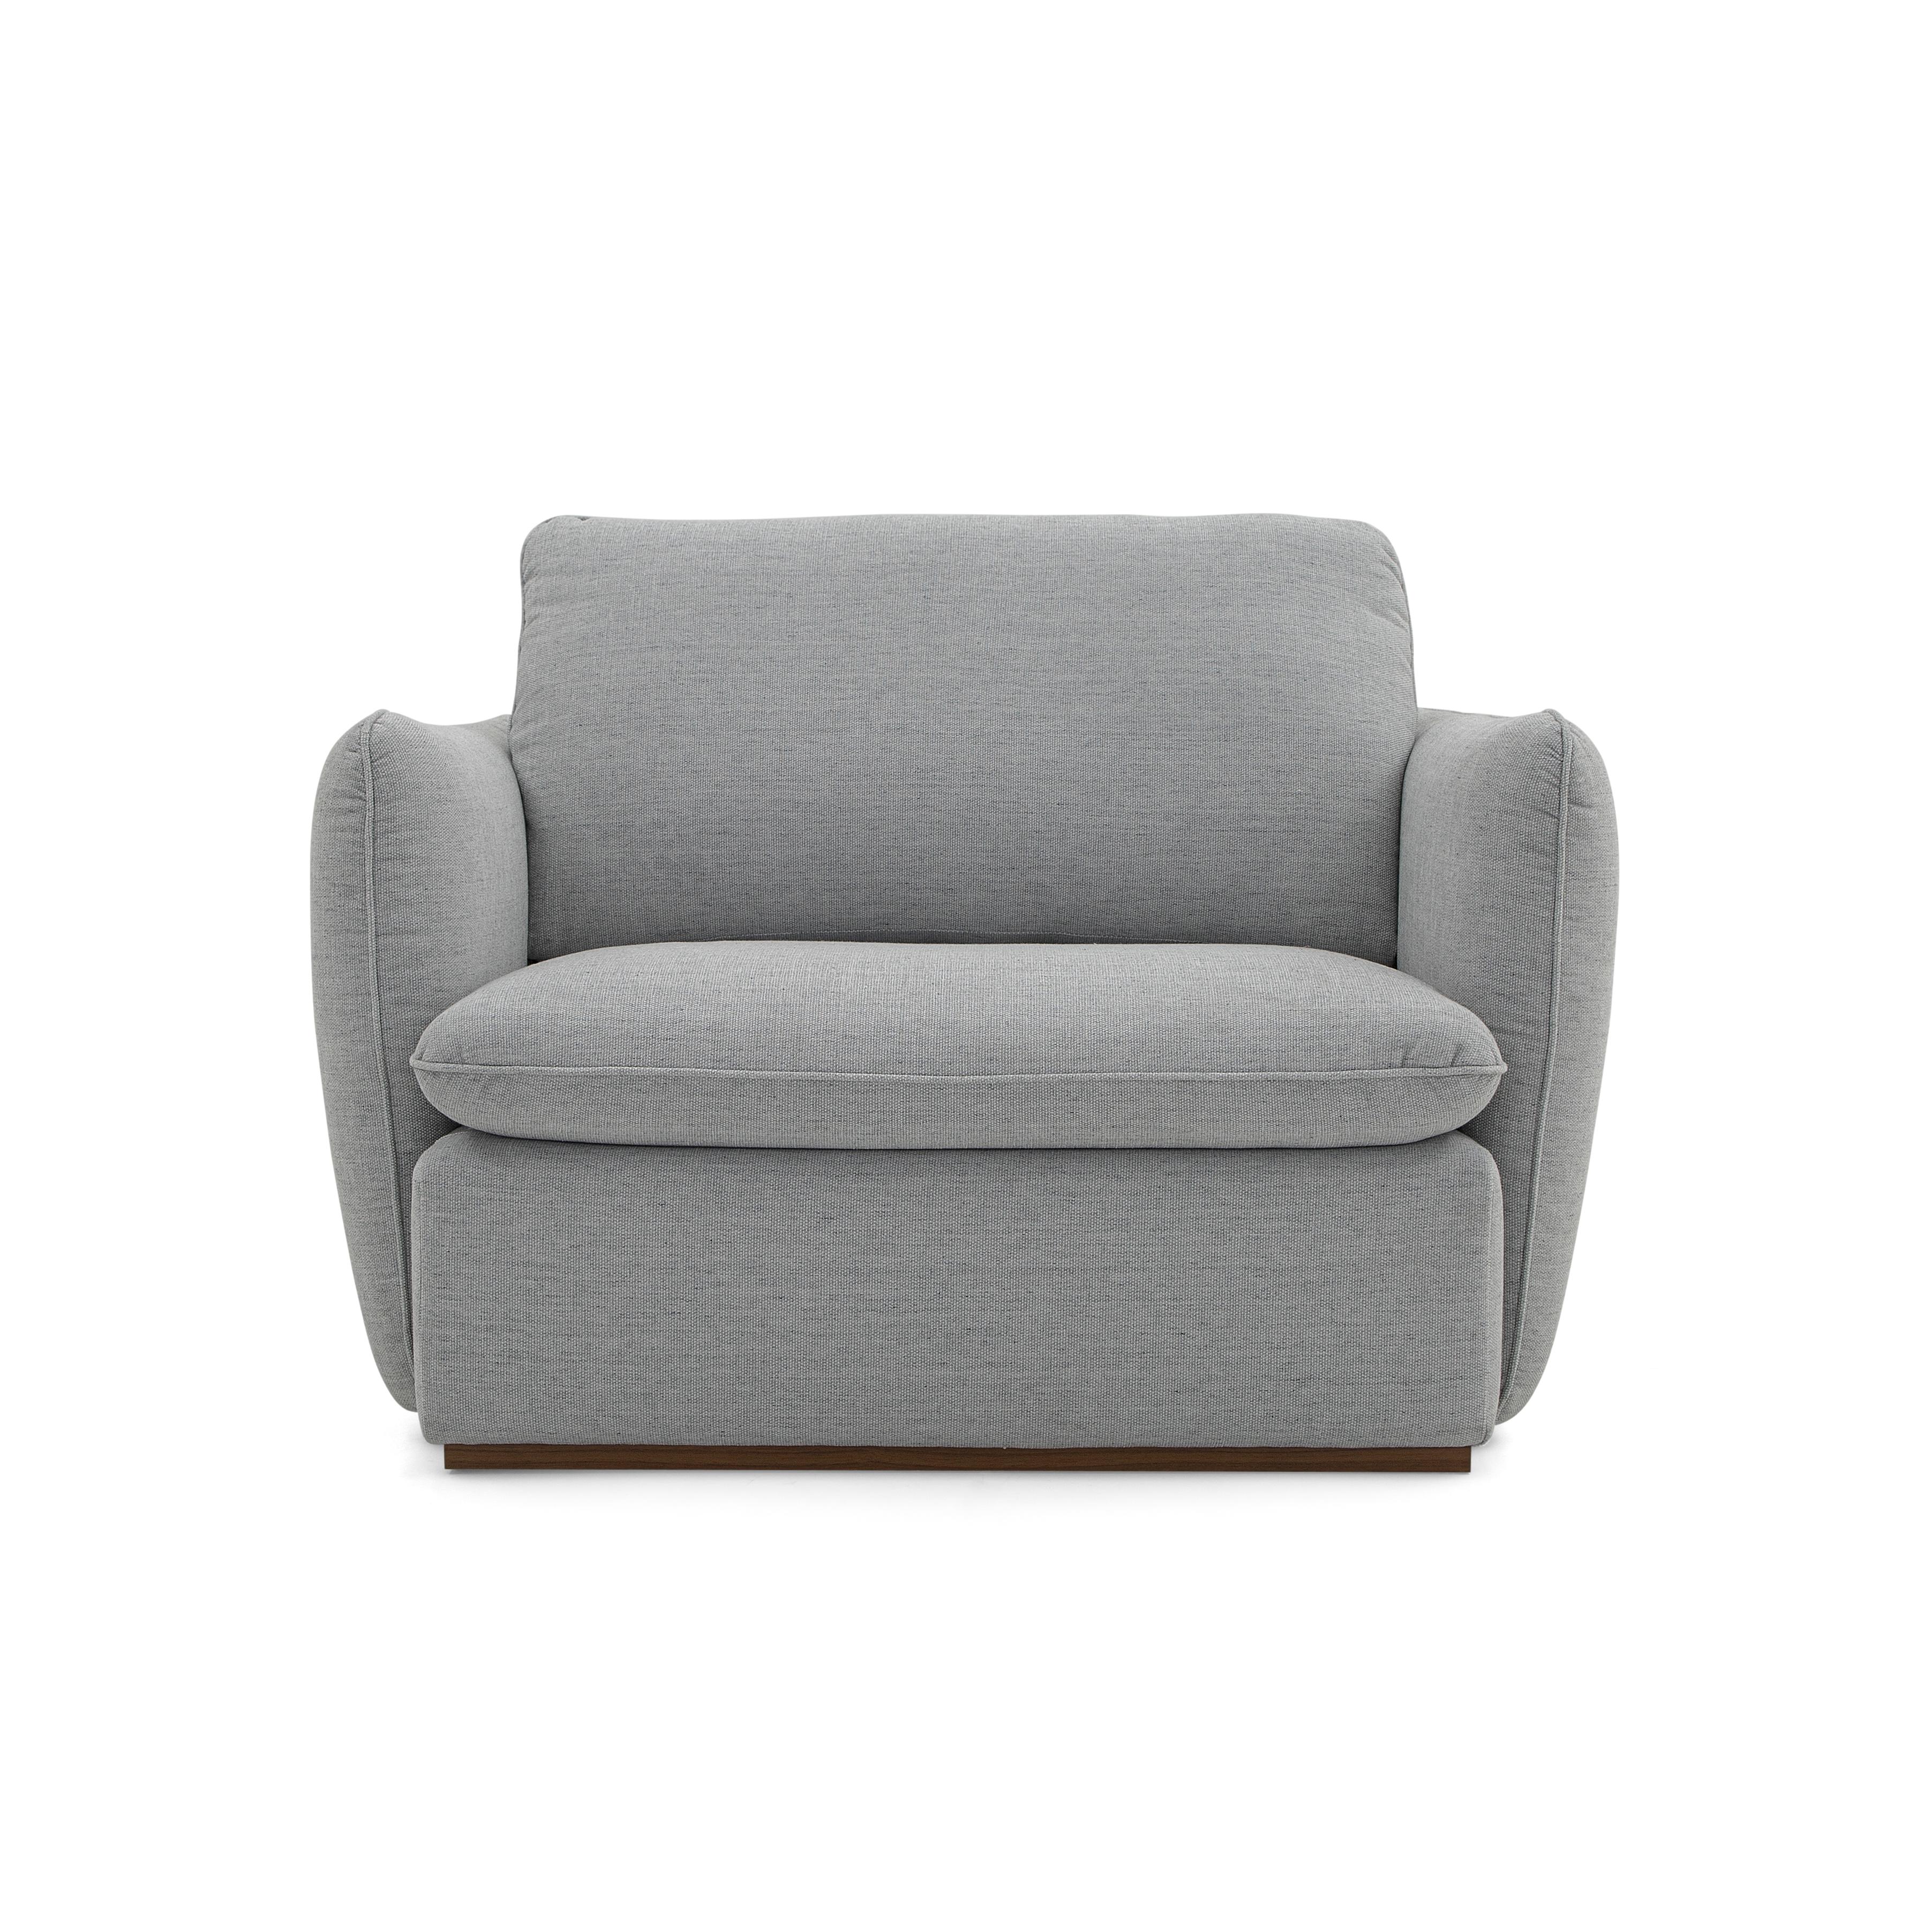 Contemporary Kolo Armchair Upholstered in Light Gray Fabric For Sale